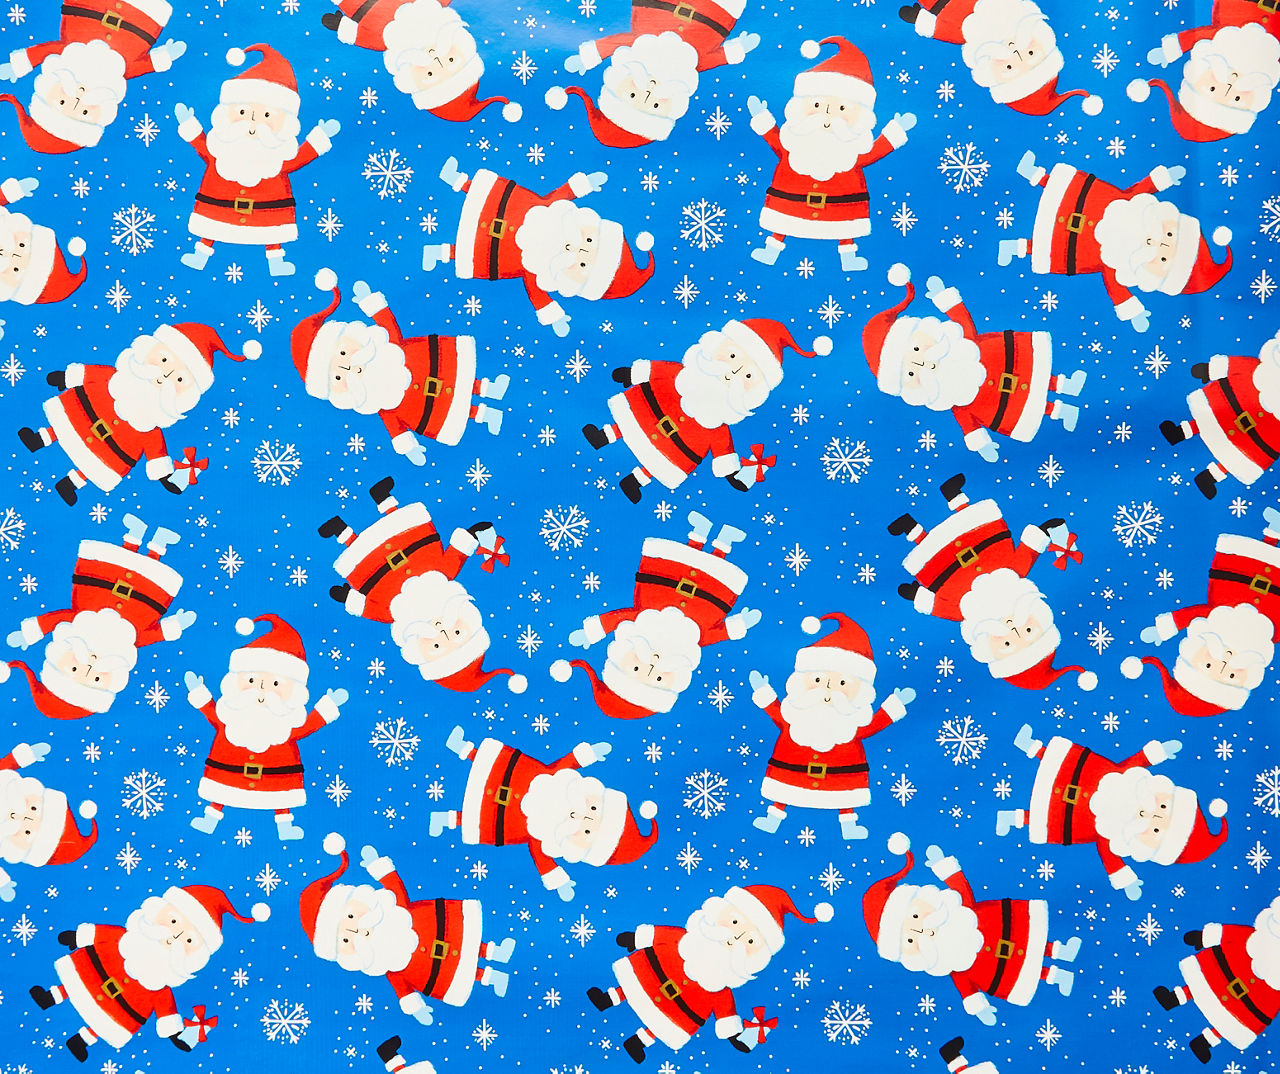 Poundstretcher - Christmas wrapping paper for £1 bargain! 👍 Have you  finished your shopping yet? 🎄